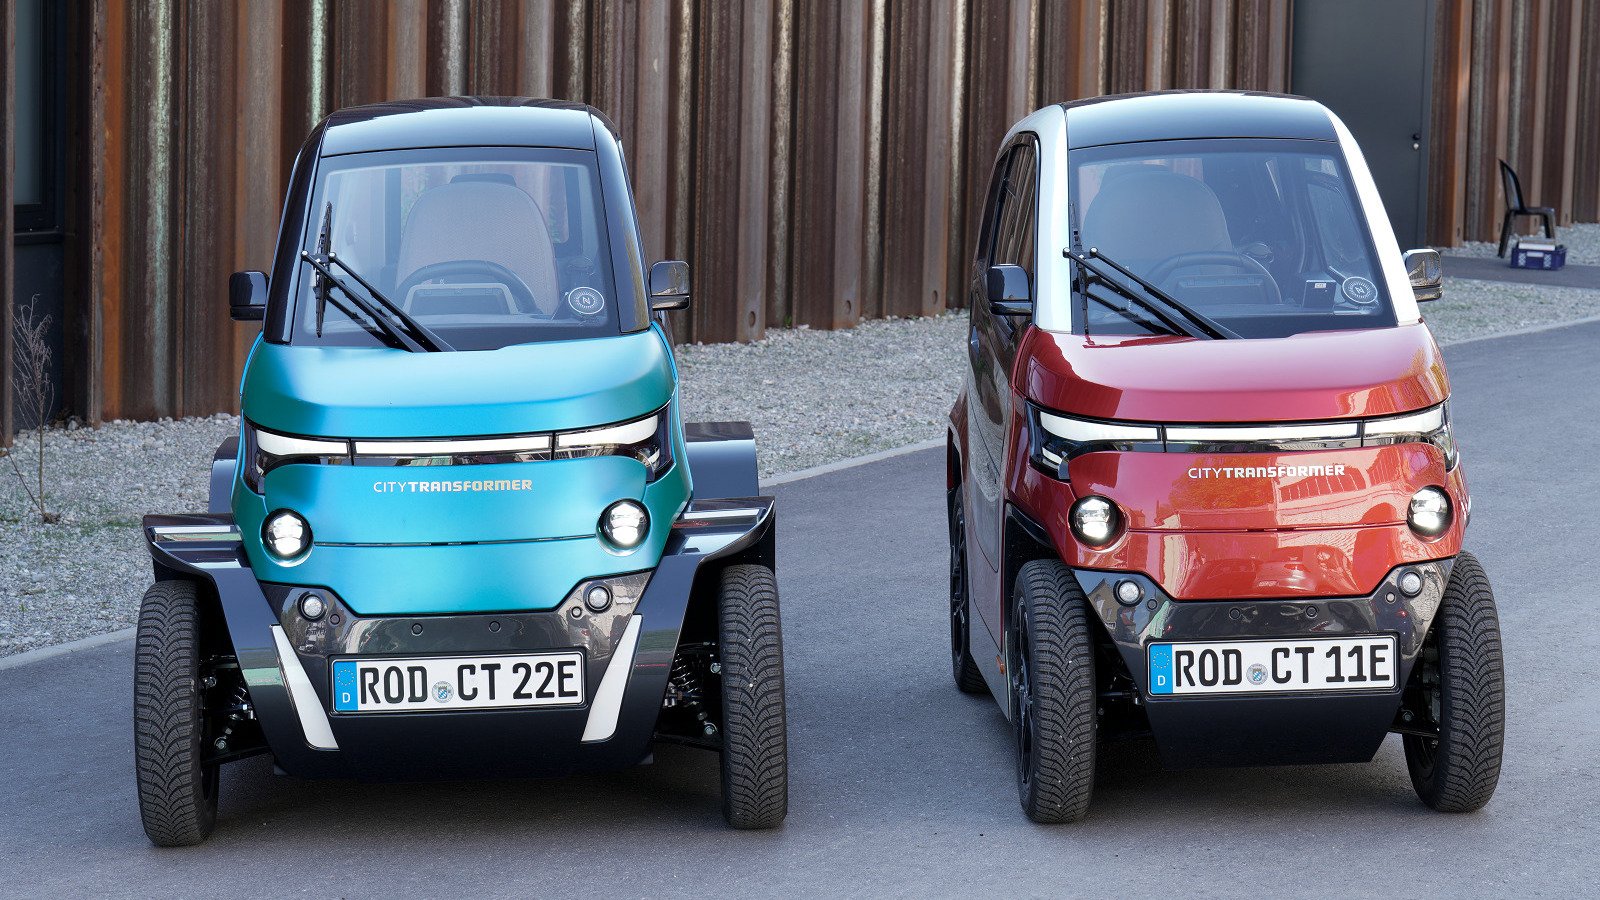 This Wild Electric Car Shrinks To Squeeze Into Tight Parking